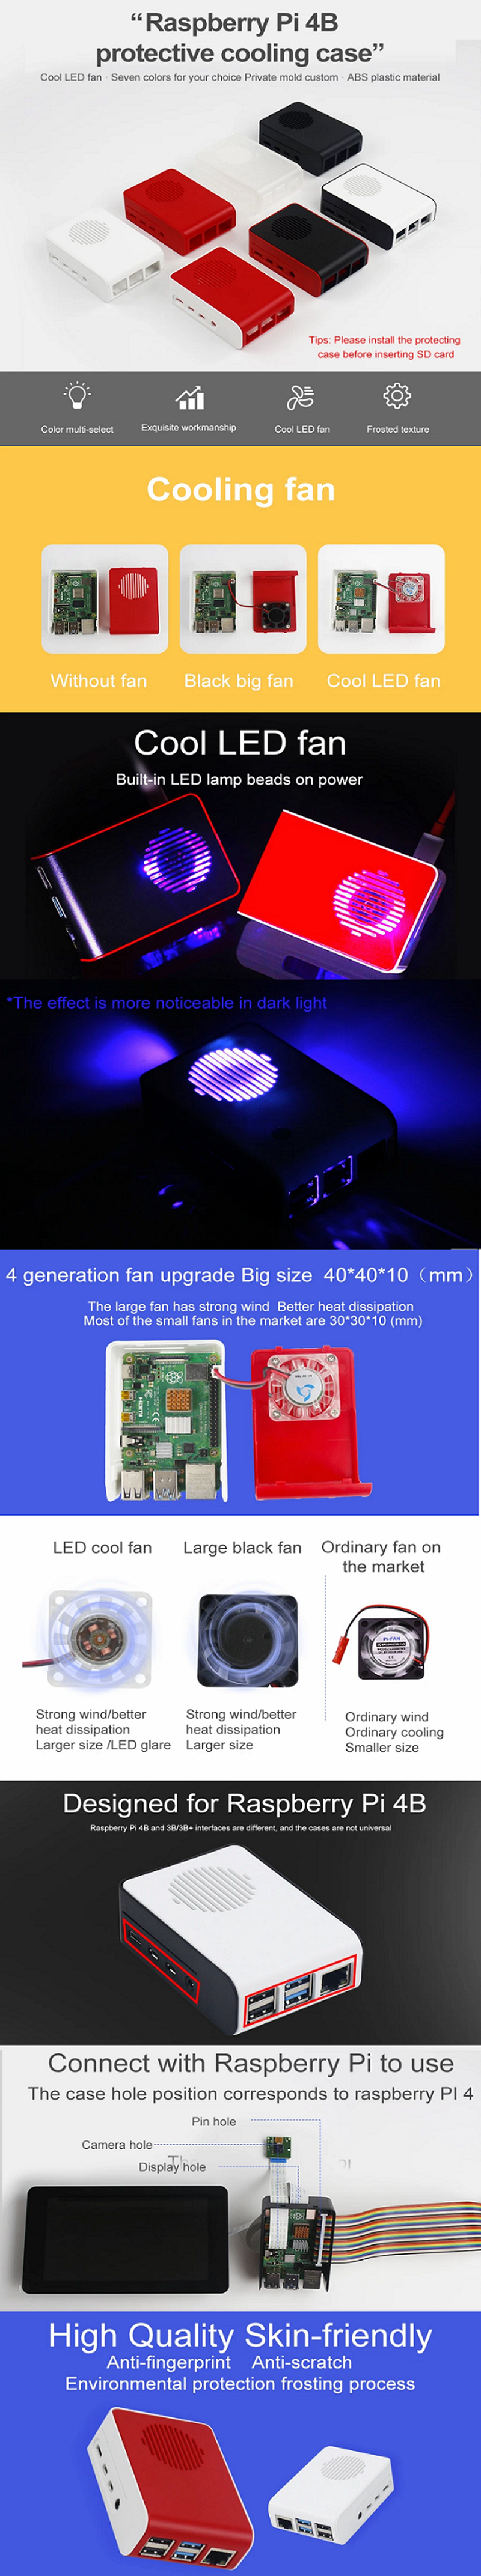 Yahboom-ABS-Protective-Case-with-Cooling-Fan-Version-for-Raspberry-Pi-4B-1617052-4